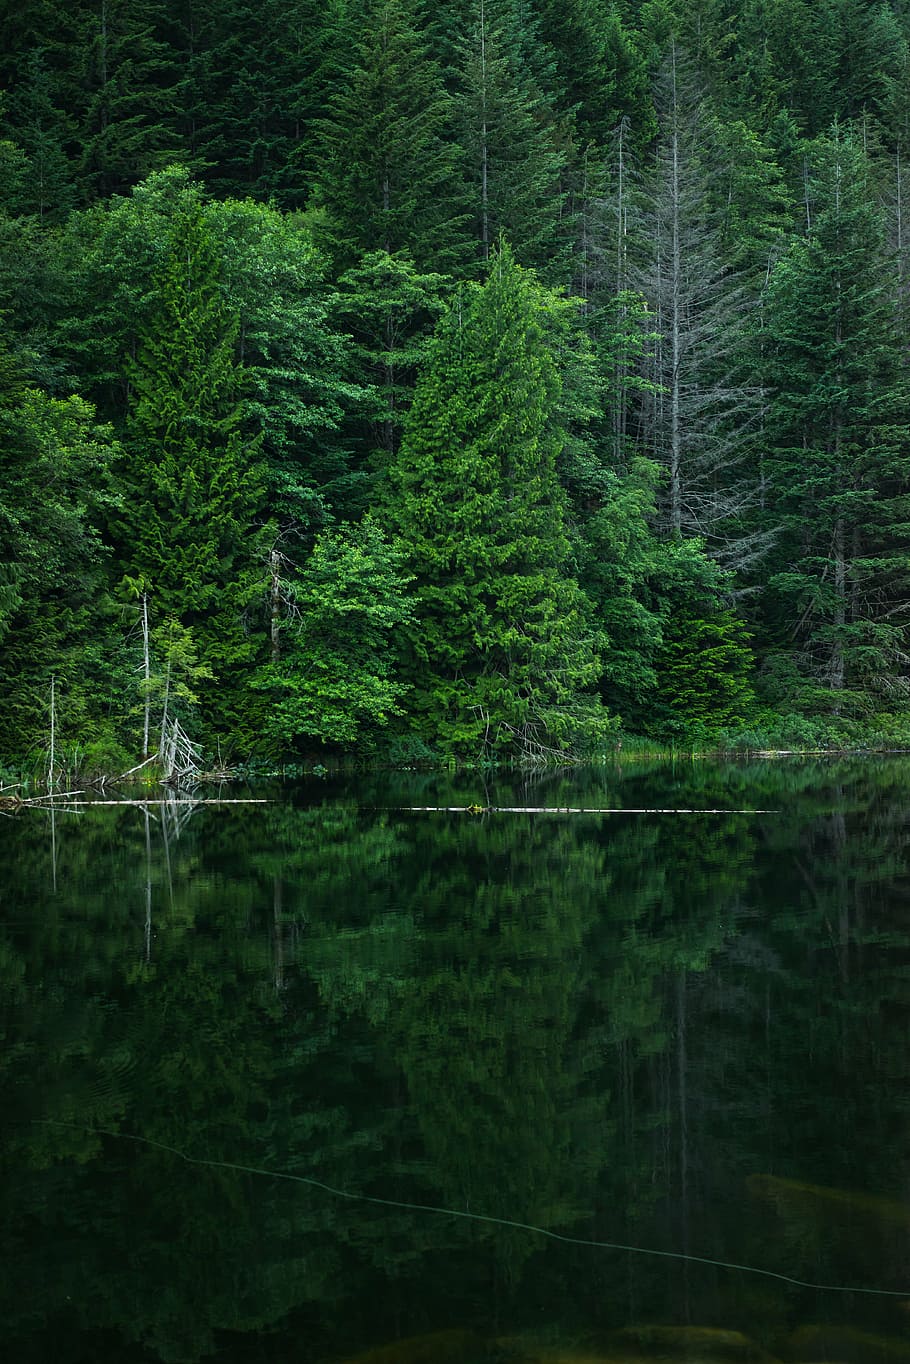 green, trees, reflection, body, water, daytime, nature, woods, forest, river